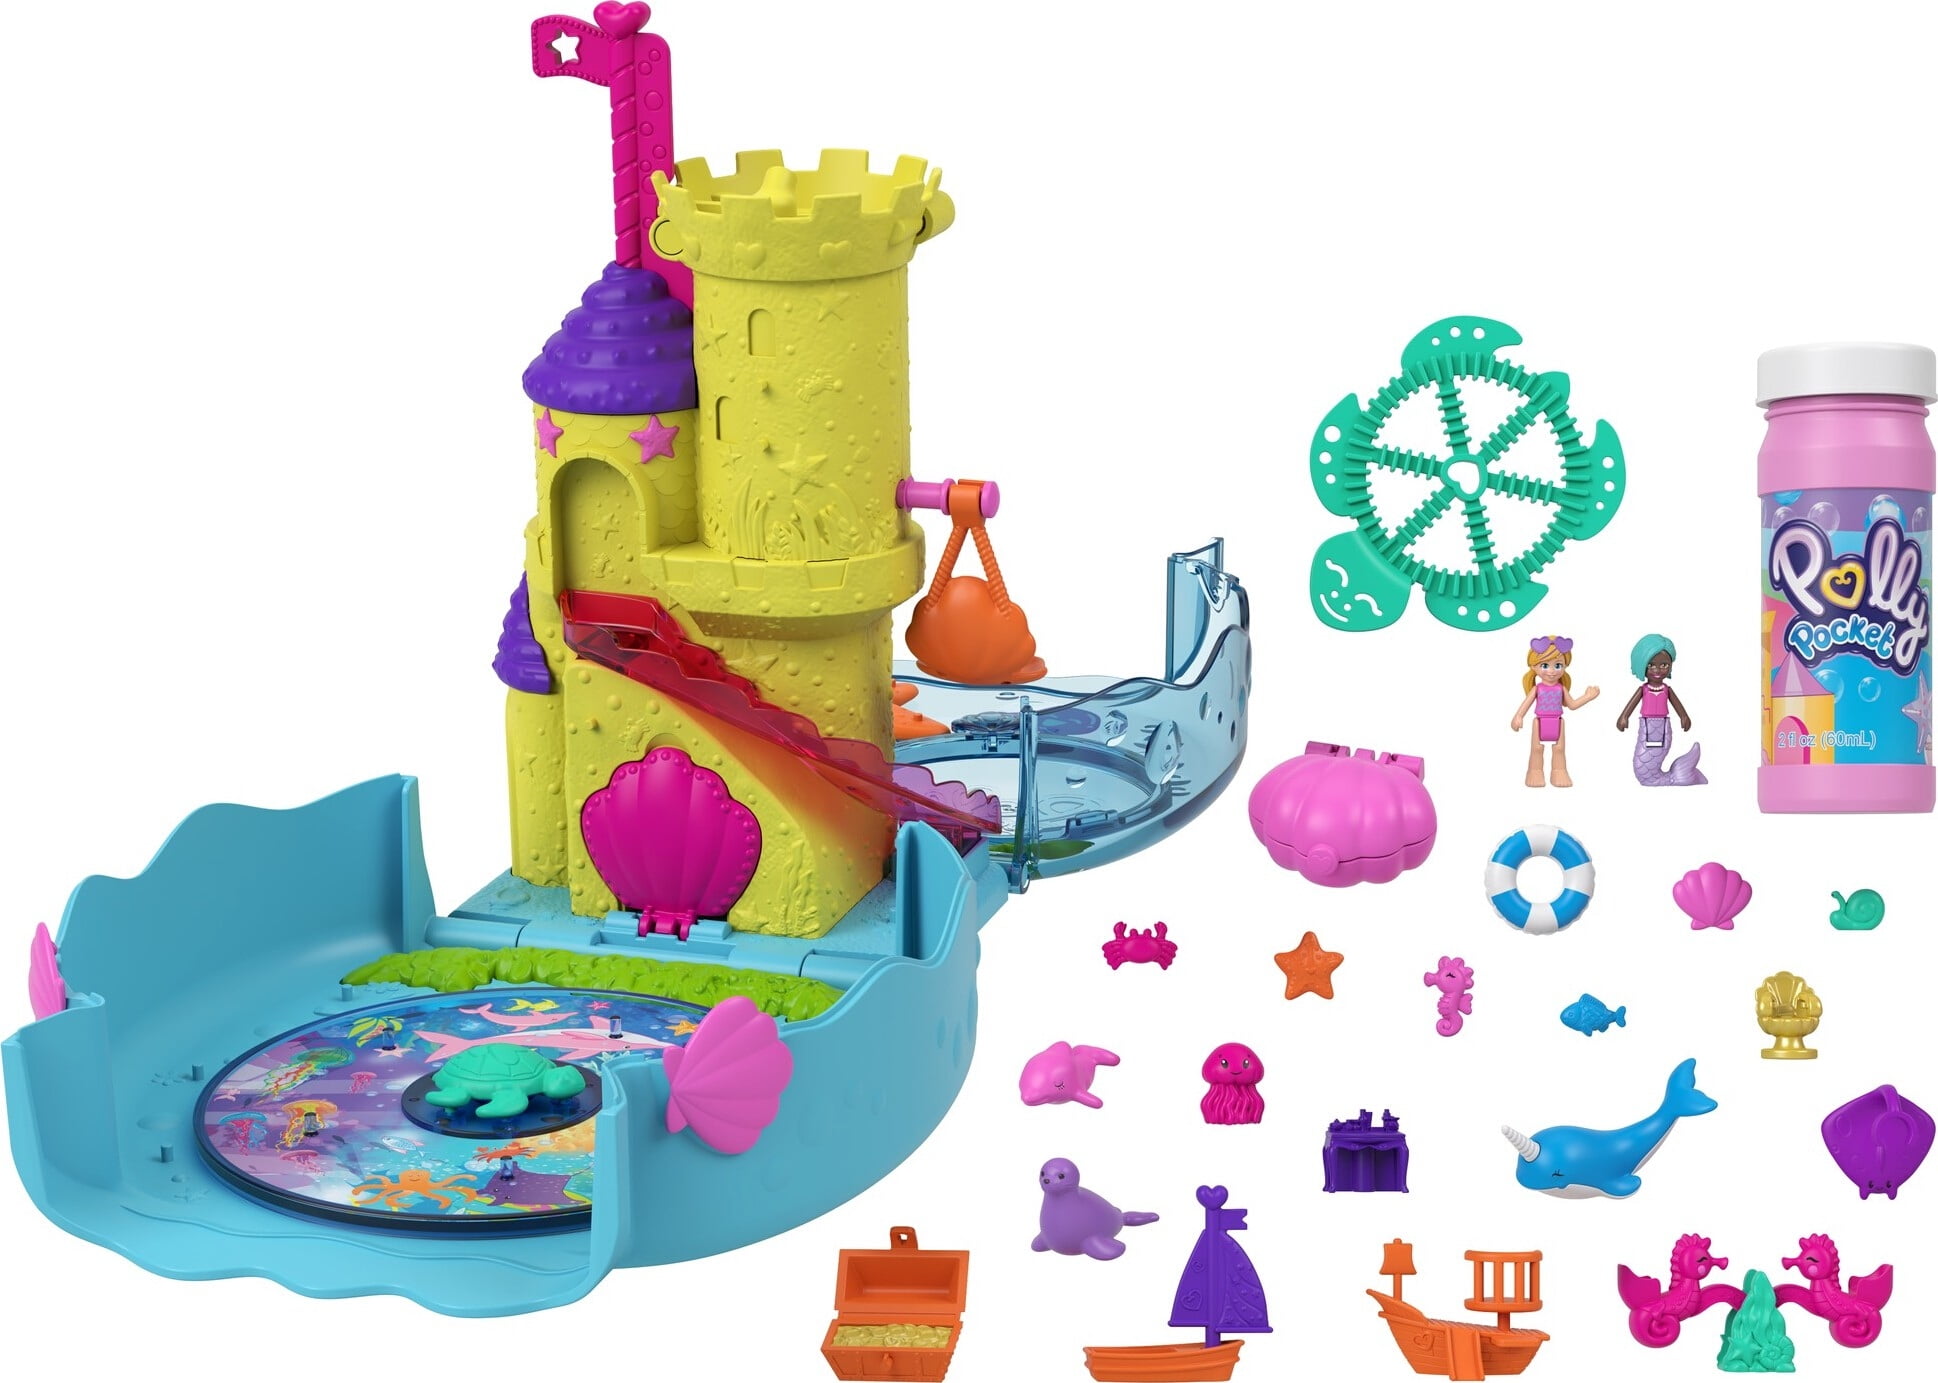 Polly Pocket Bubble Aquarium with Underwater Theme, 2 Bubble-Making Features, 2 Dolls, Bubble Solution & 18 Accessories, 4 & Up